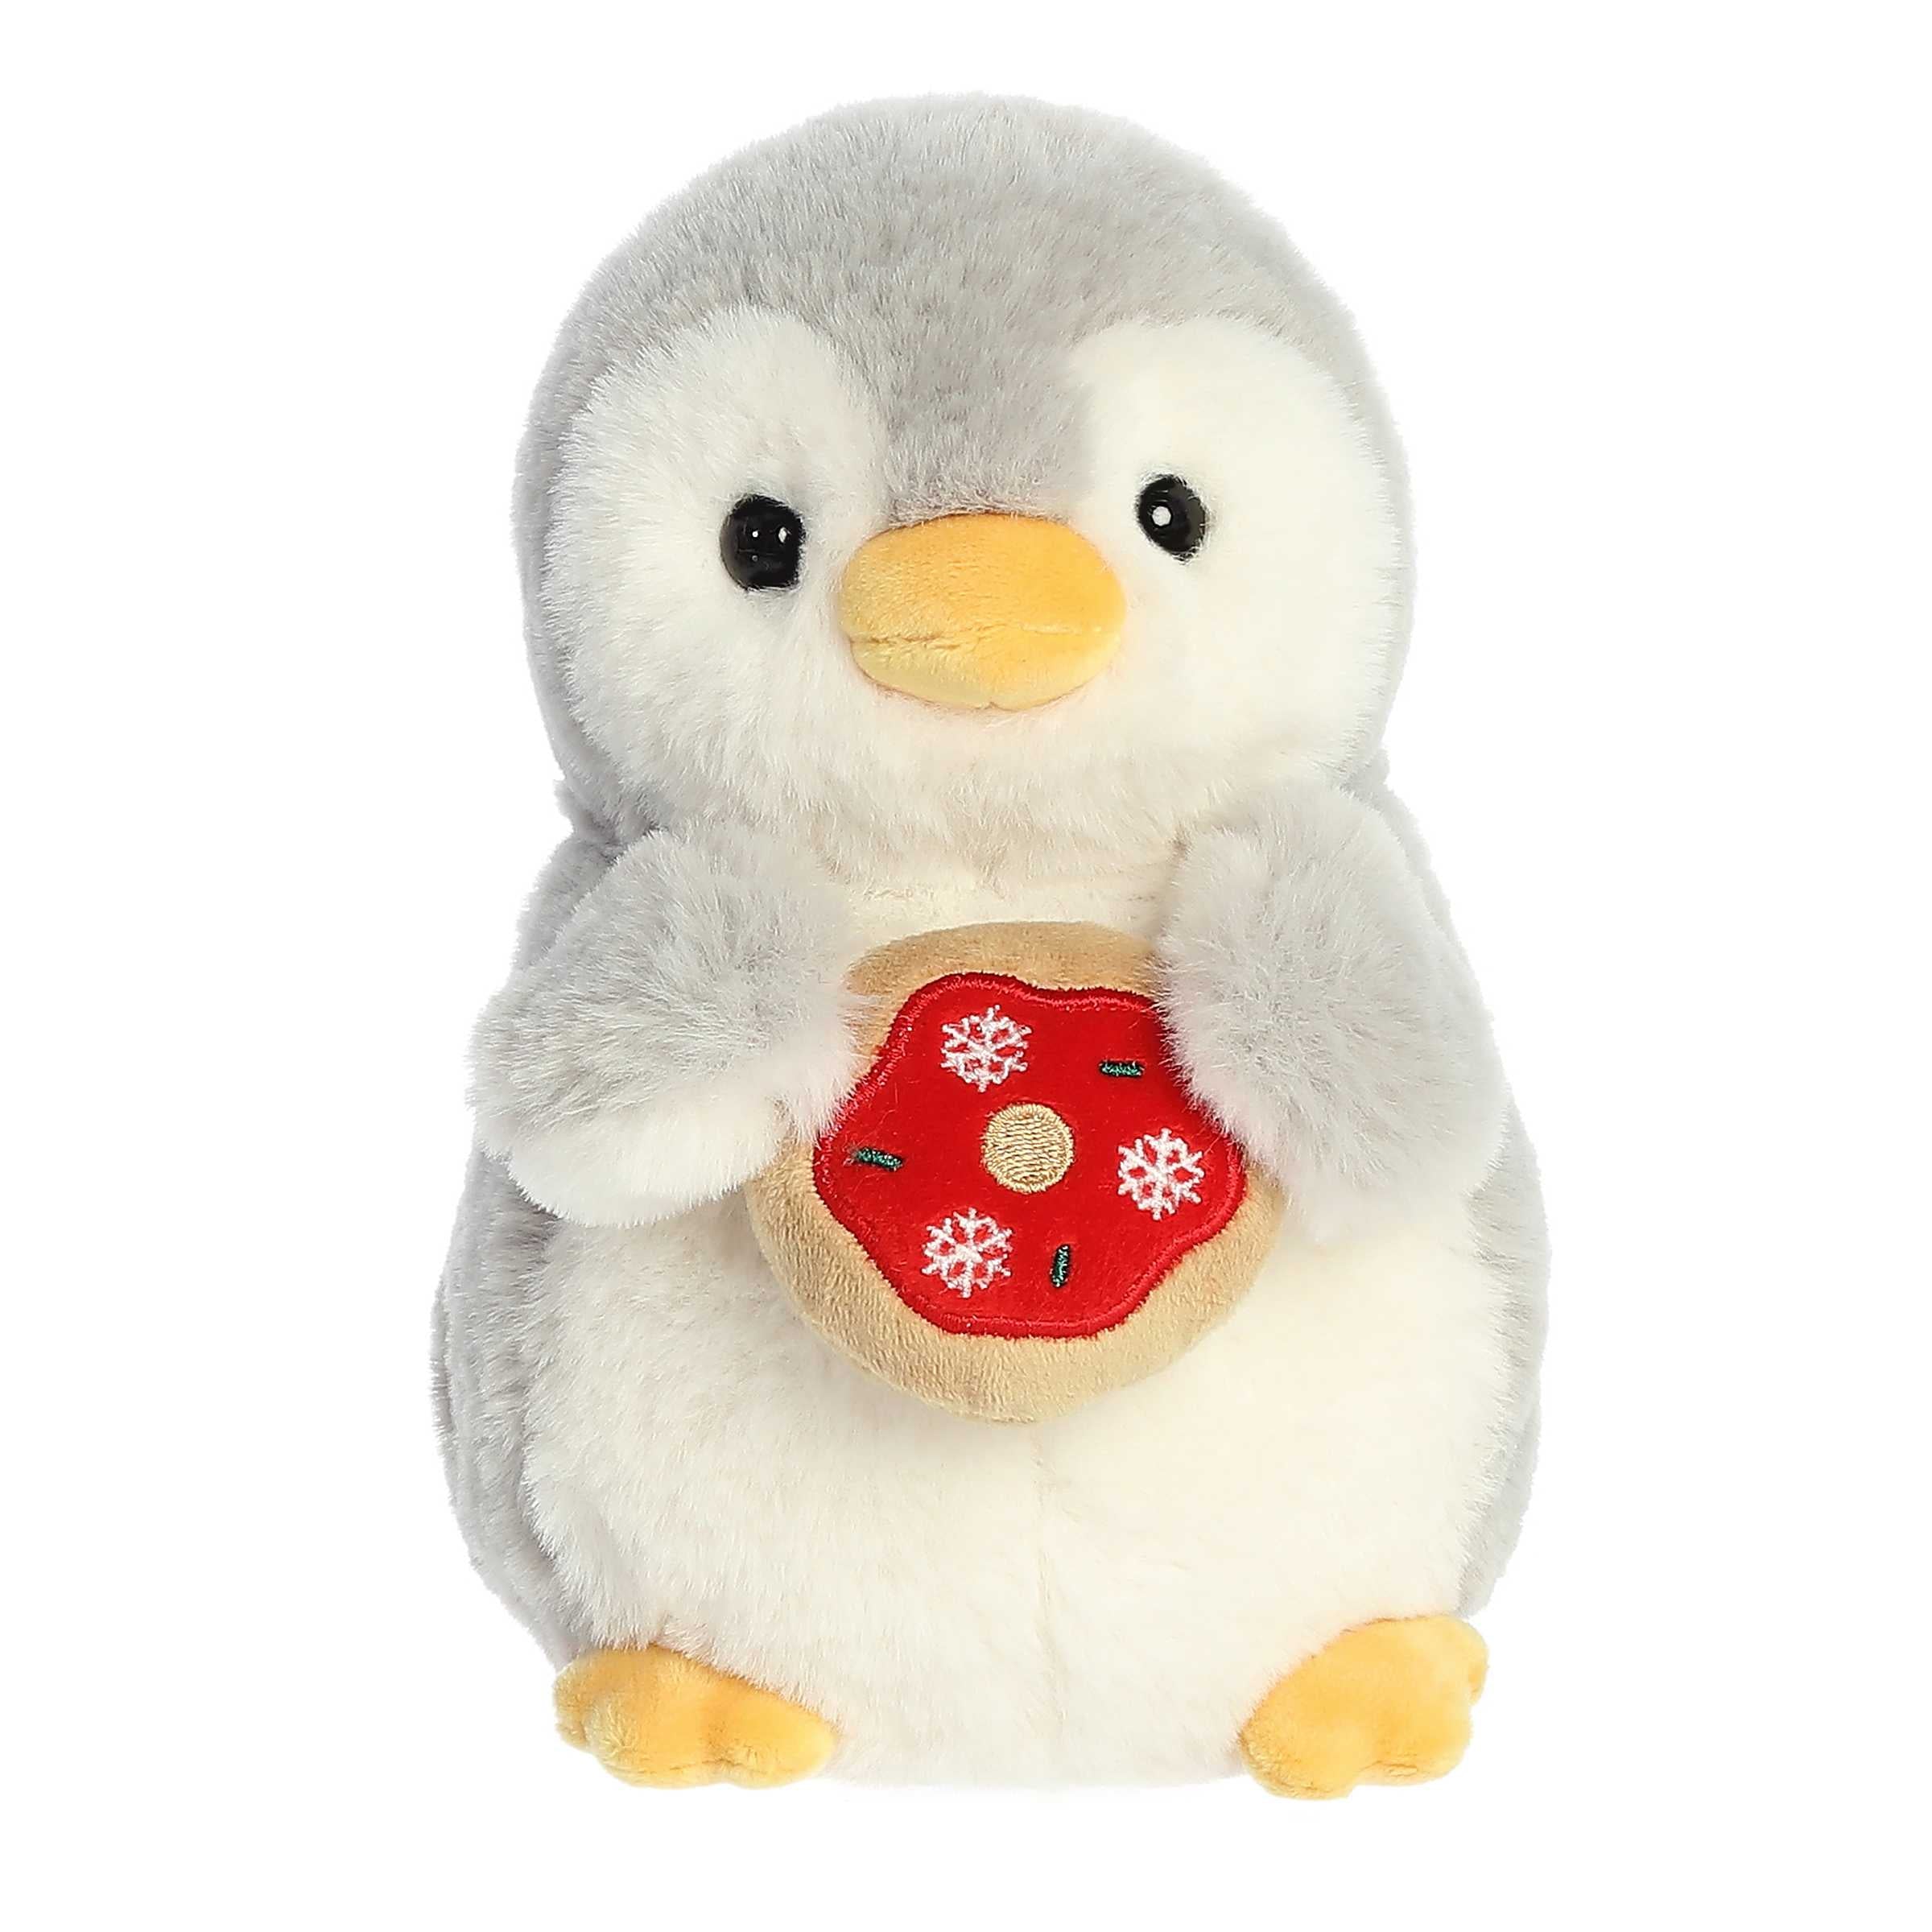 Adorable light grey penguin with yellow beak and feet holiding a donut with red frosting, green sprinkles, and snowflakes